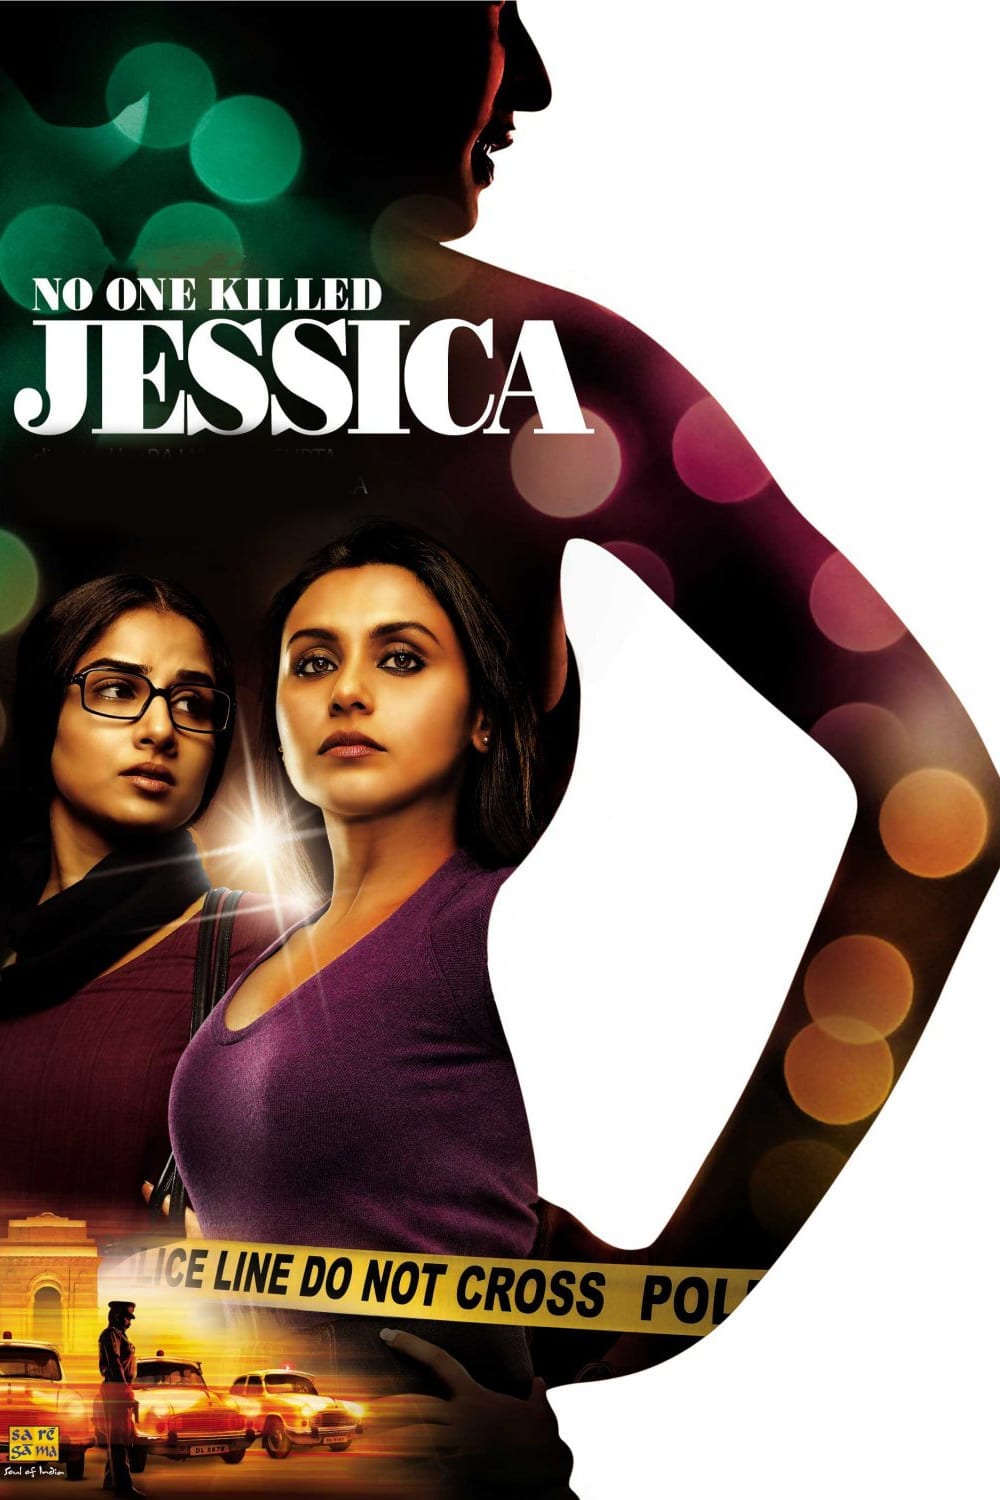 Poster for the movie "No One Killed Jessica"